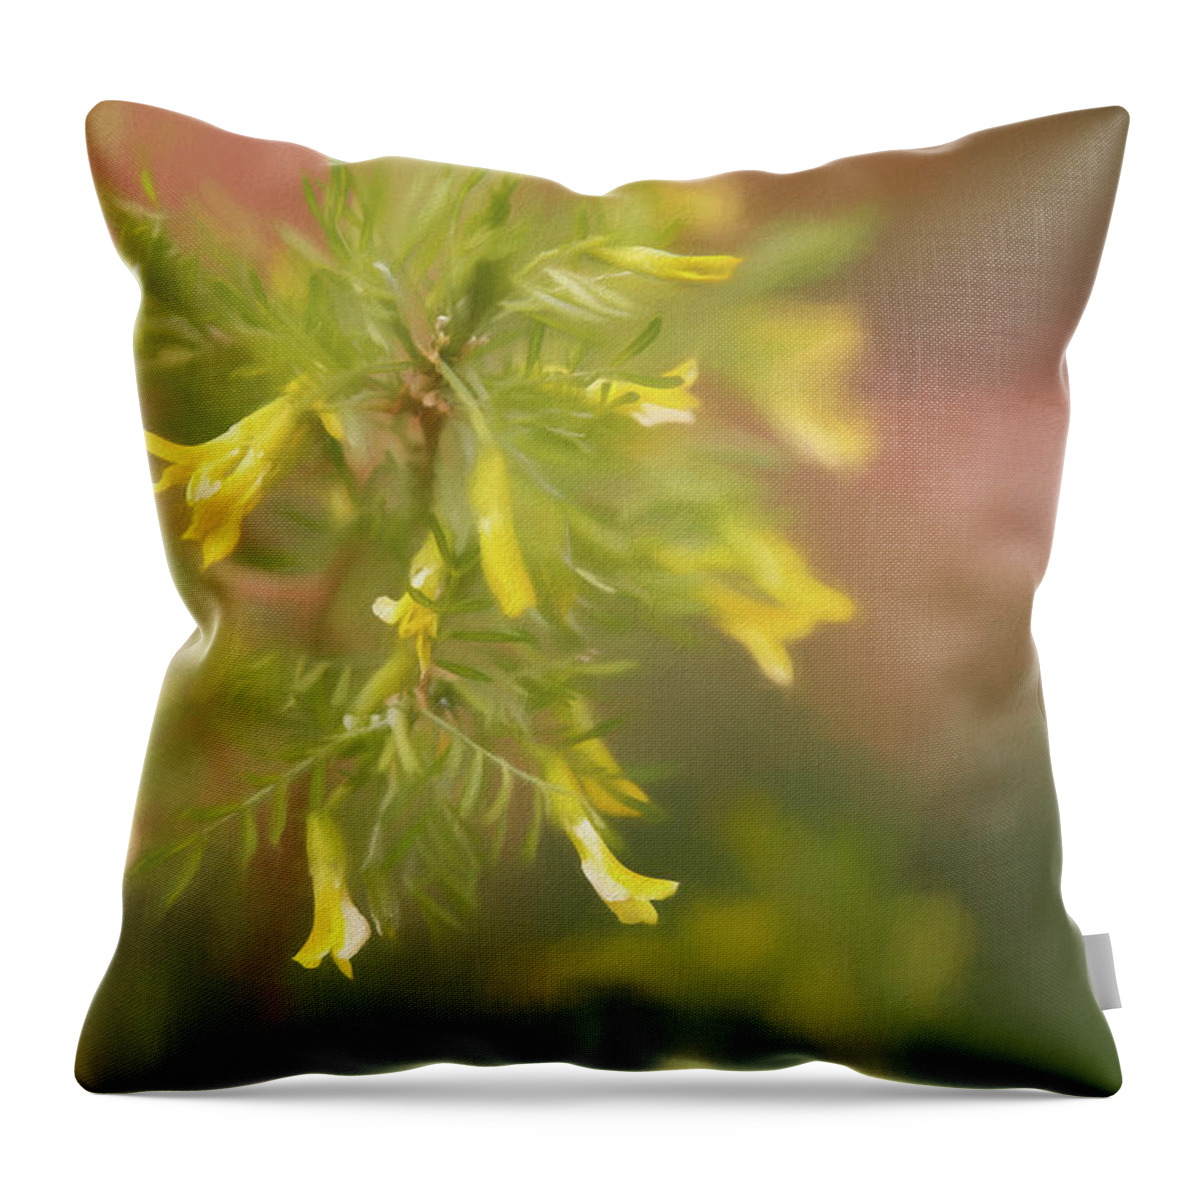 Bush Throw Pillow featuring the photograph Yellow Drips by Elin Skov Vaeth